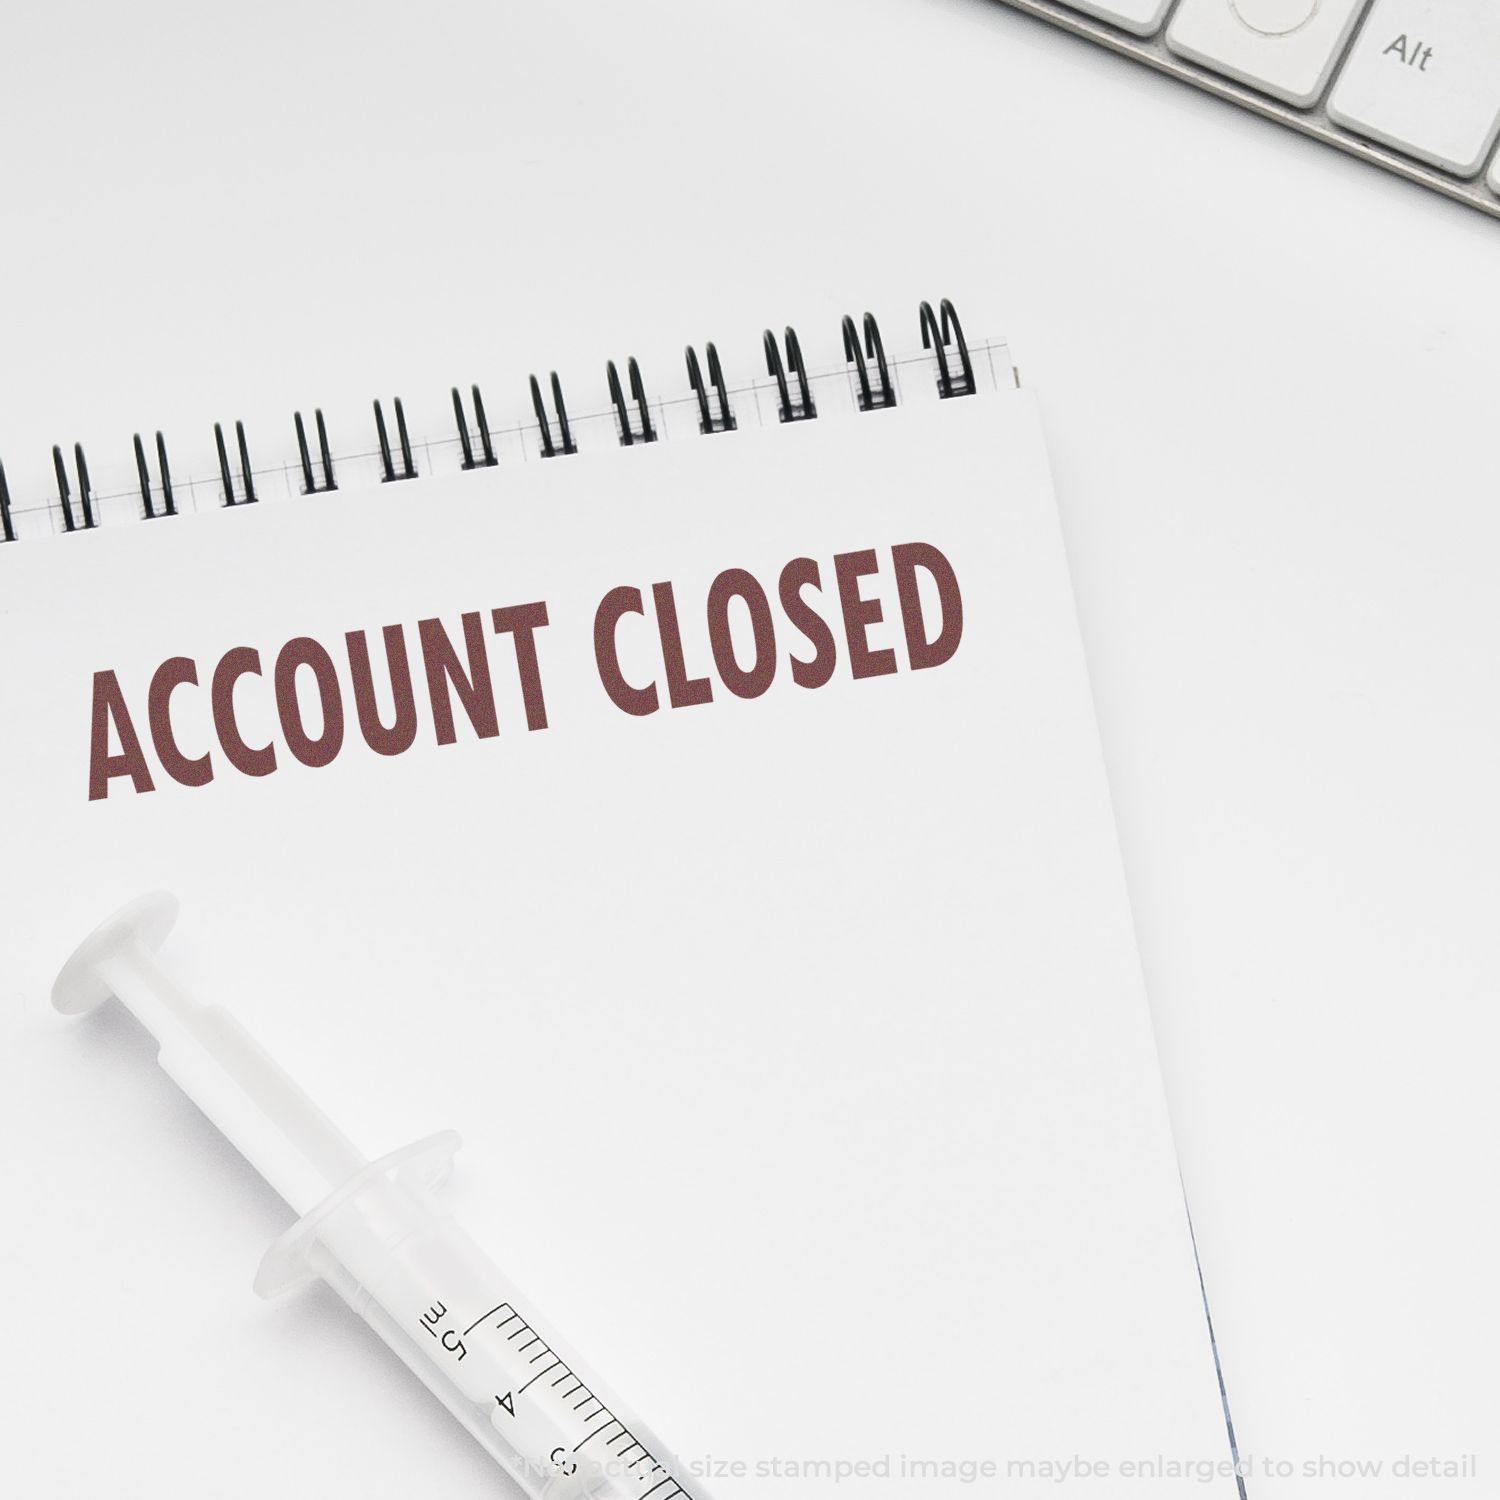 Large Self-Inking Account Closed Stamp image displaying "ACCOUNT CLOSED" message in large font on a notepad.